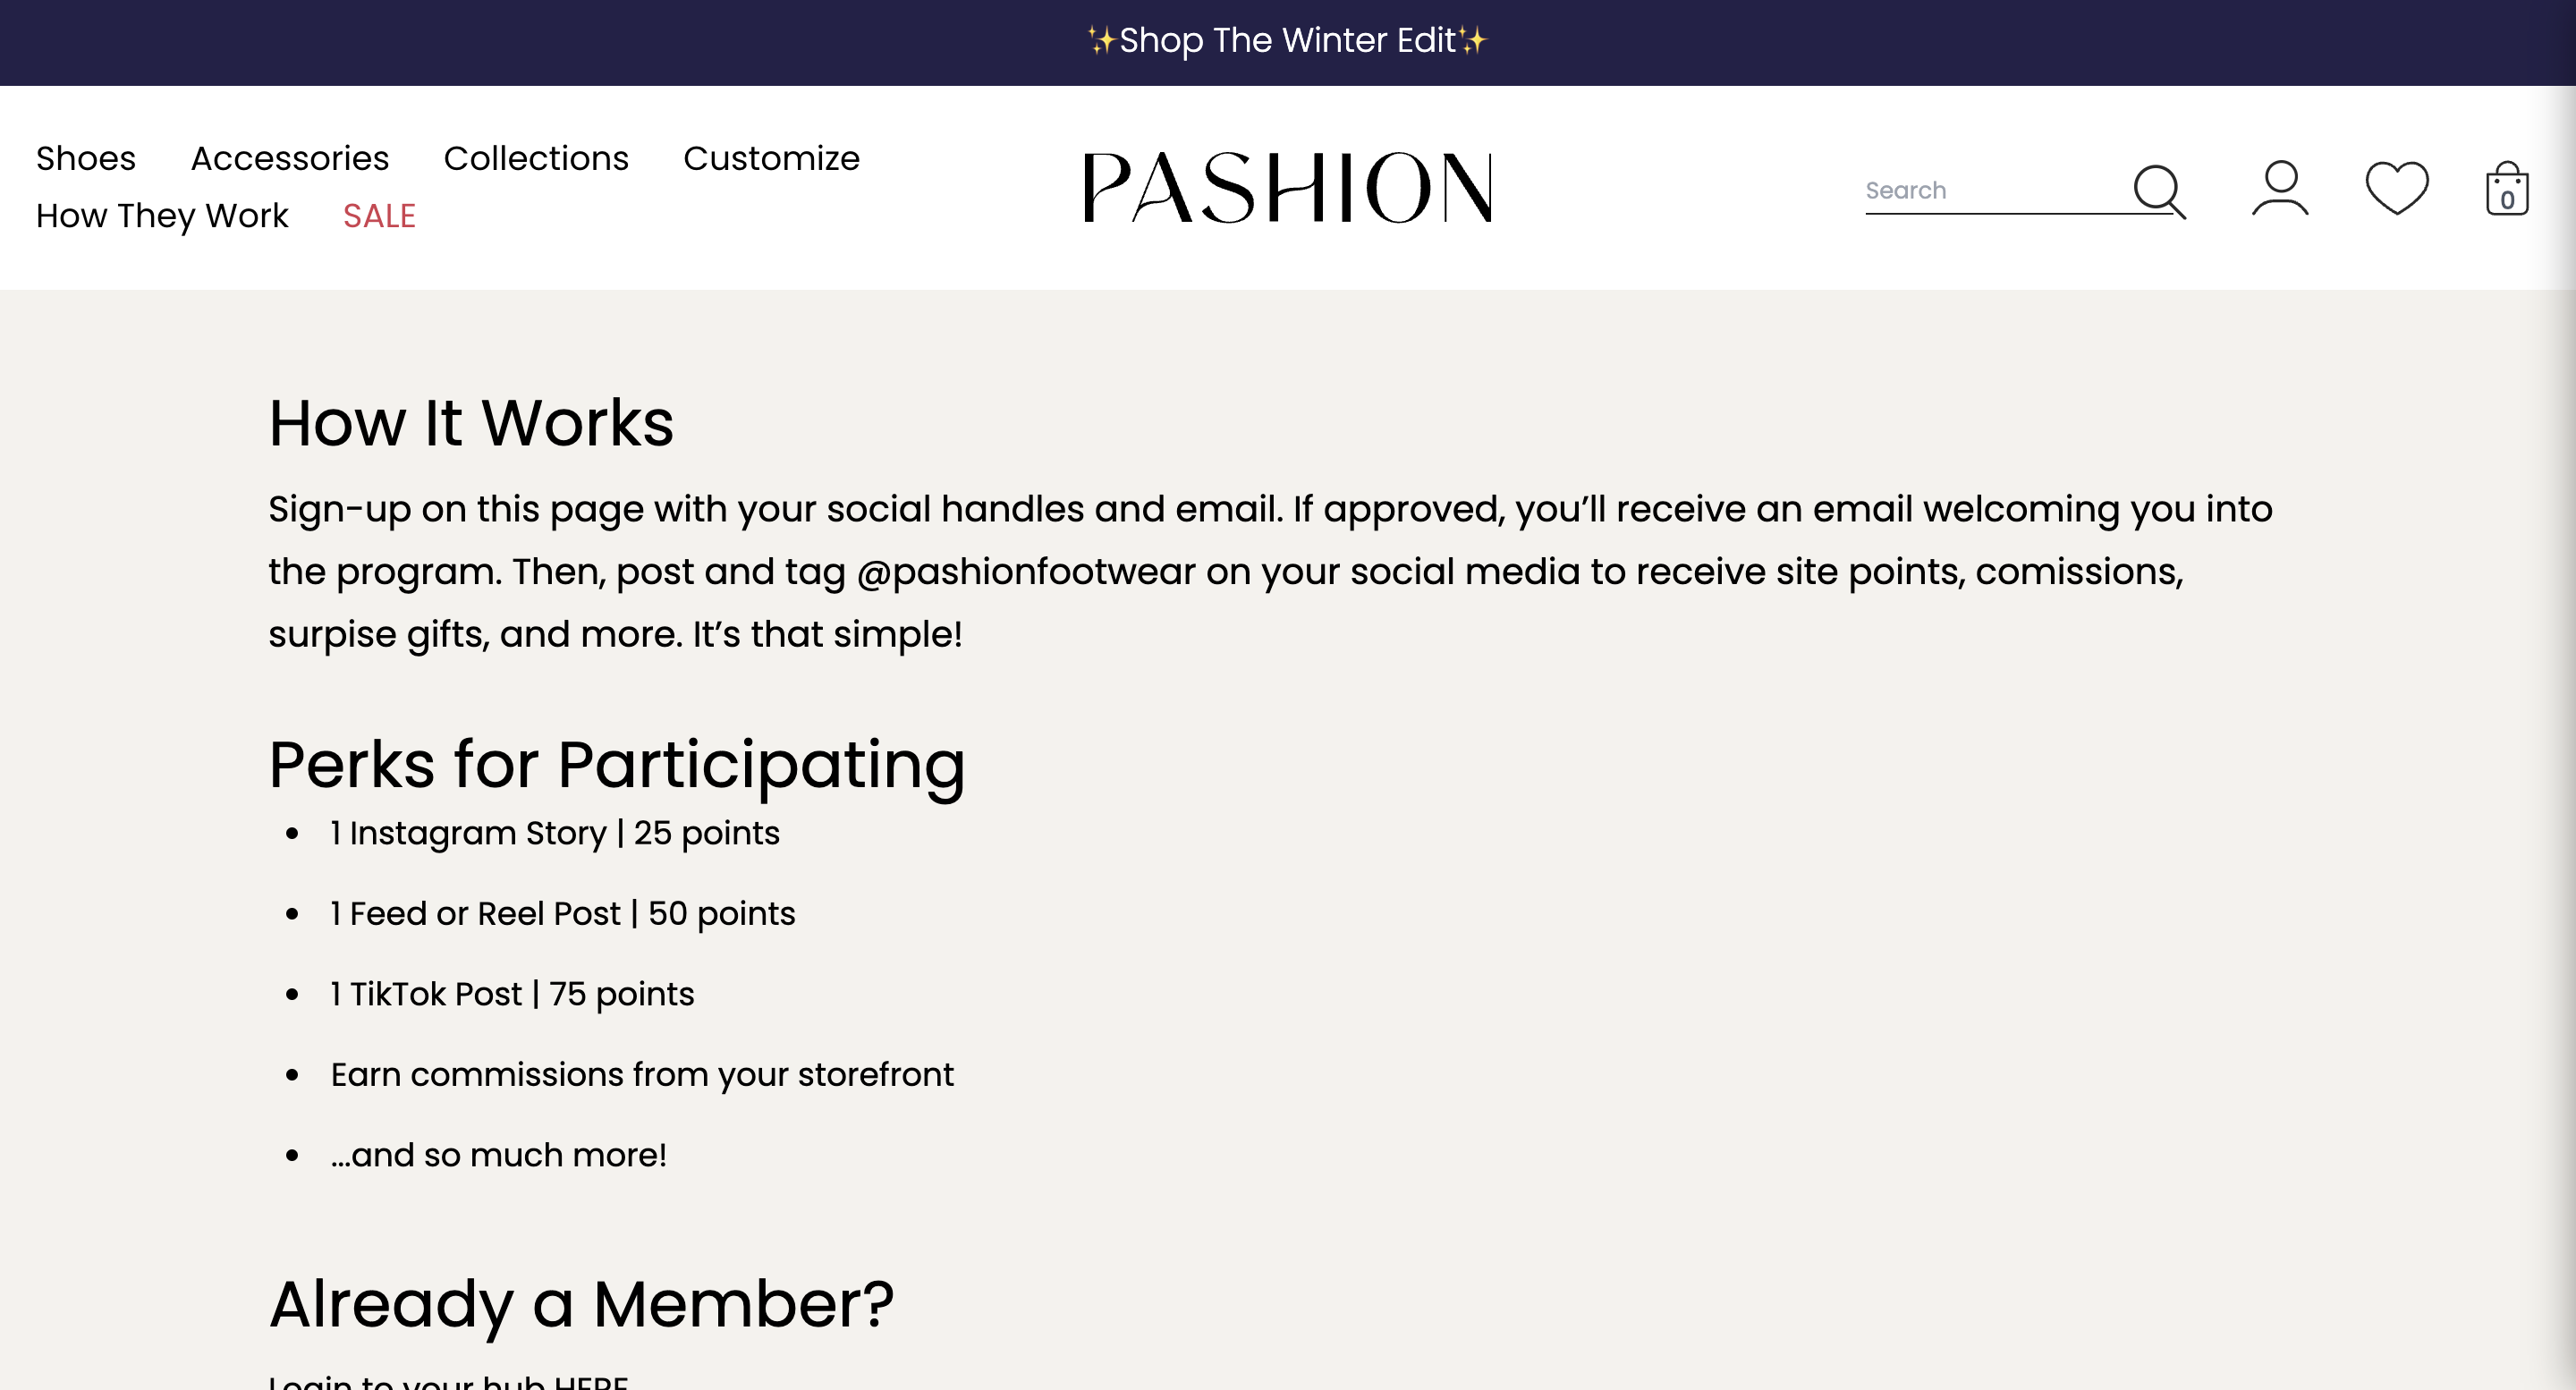 Pashion Footwear uses LoudCrowd's integration with Loyalty Lion to automatically reward creators with site points for posting about Pashion on Instagram and TikTok